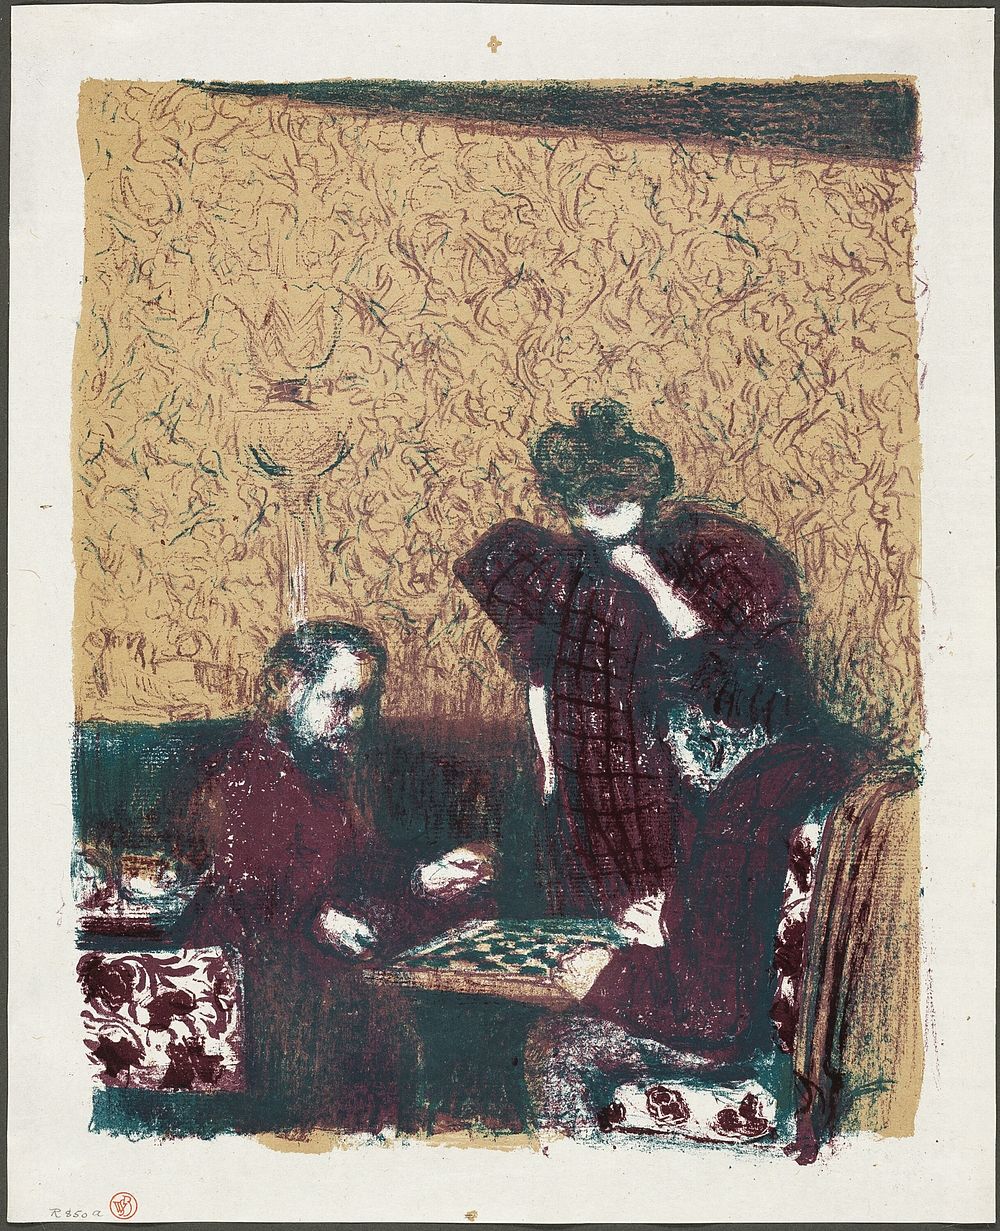 The Game of Checkers, plate one from Landscapes and Interiors by Édouard Jean Vuillard